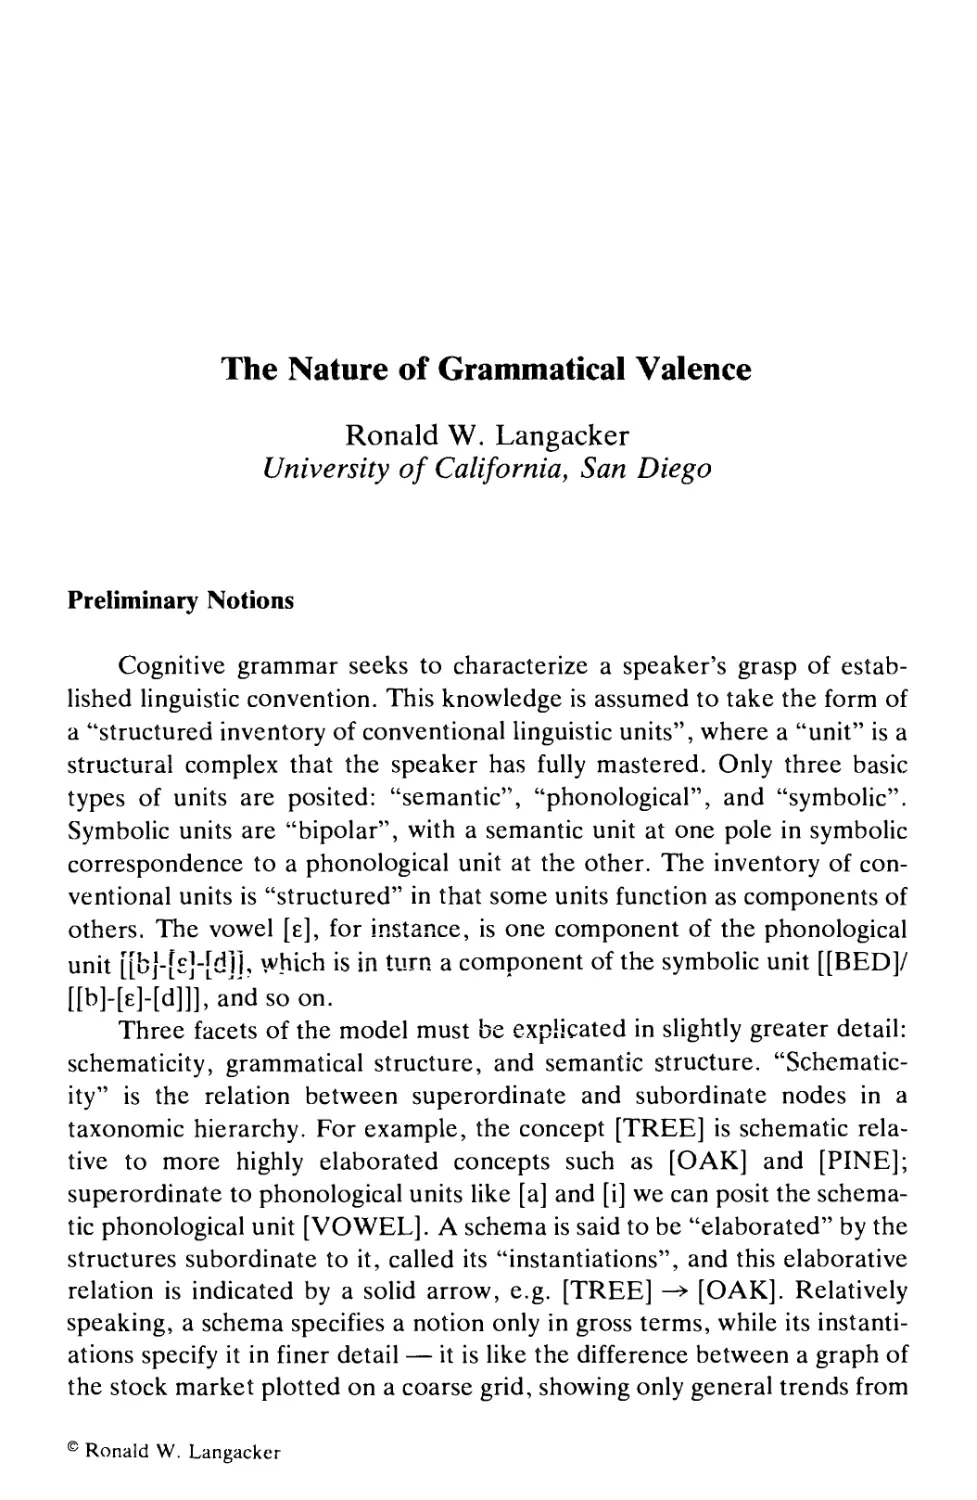 The Nature of Grammatical Valence